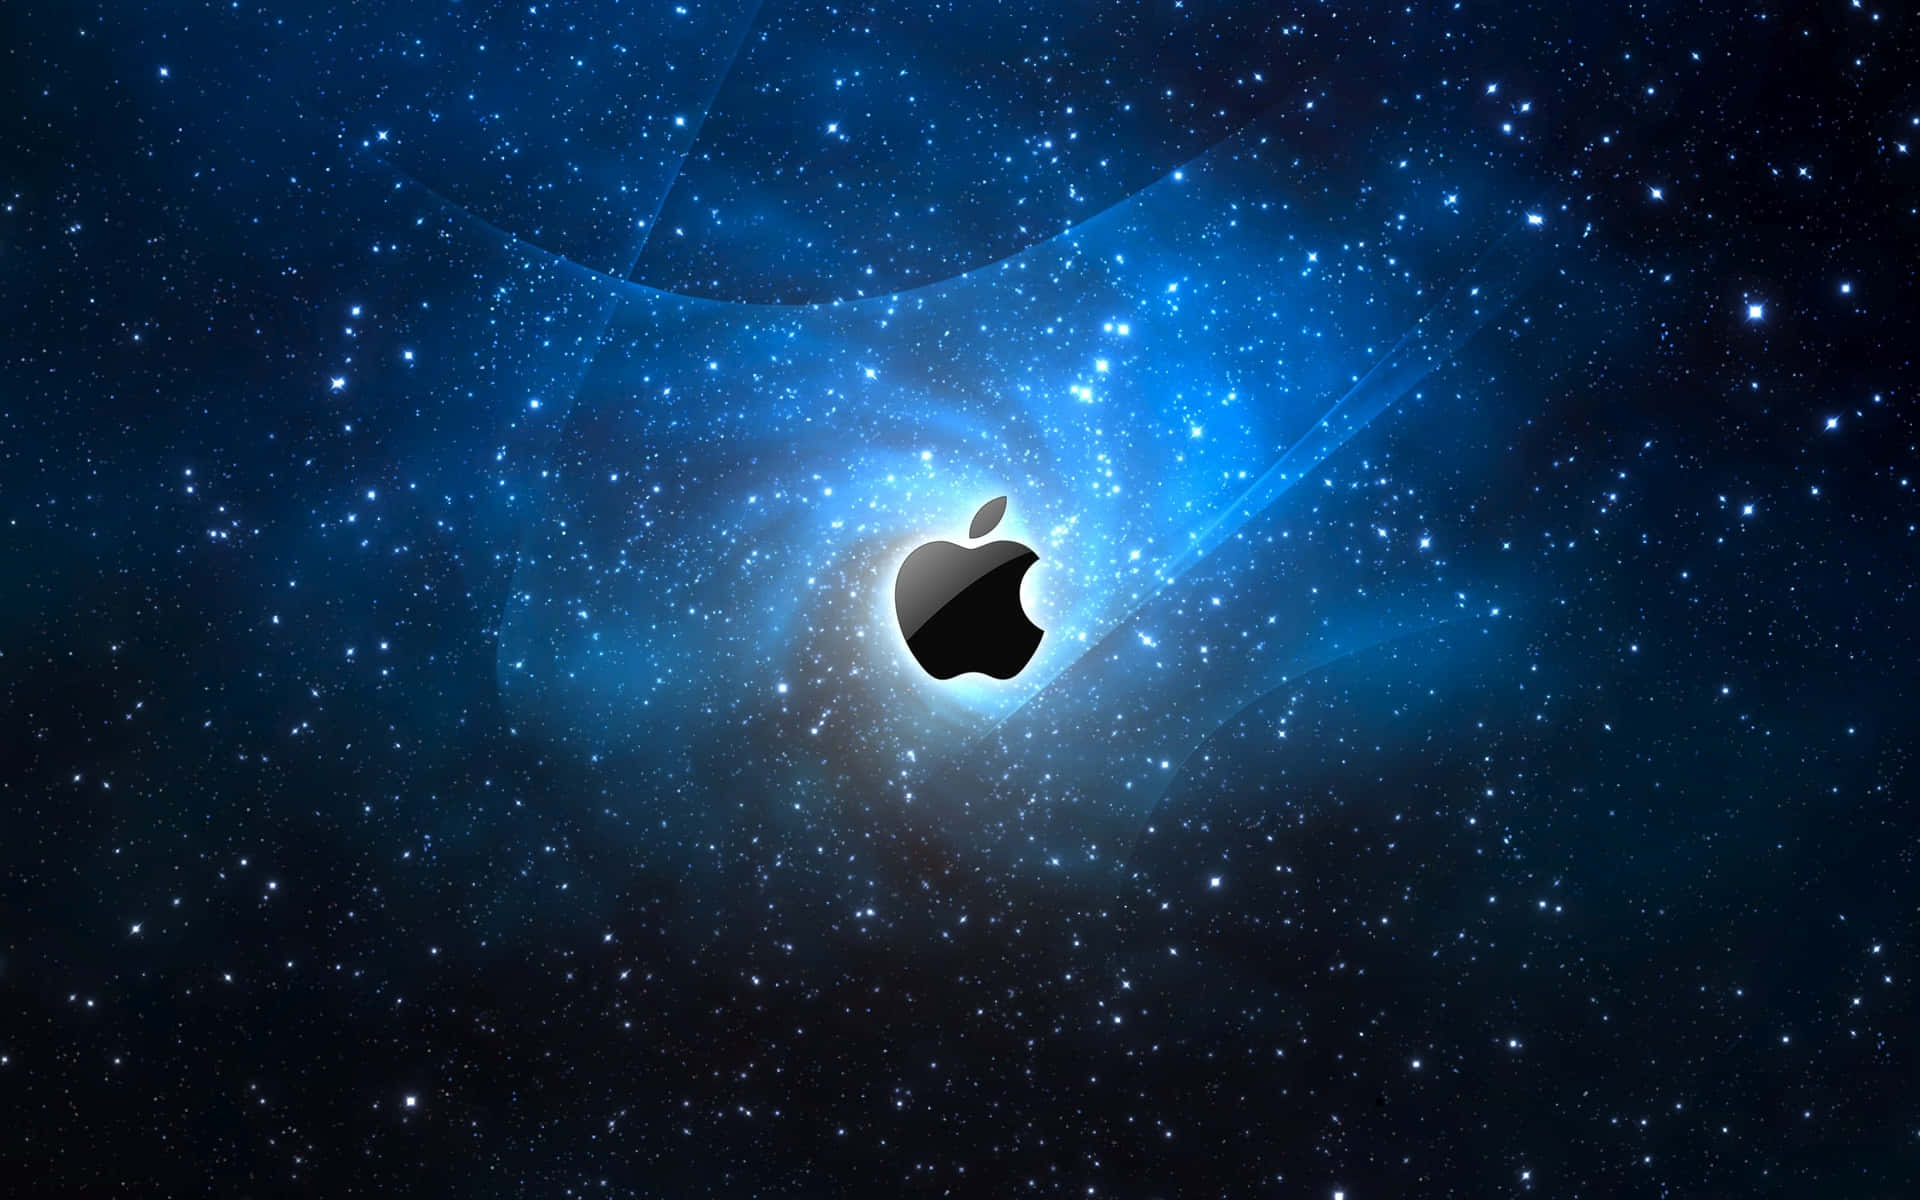 Apple Logo In The Space With Stars